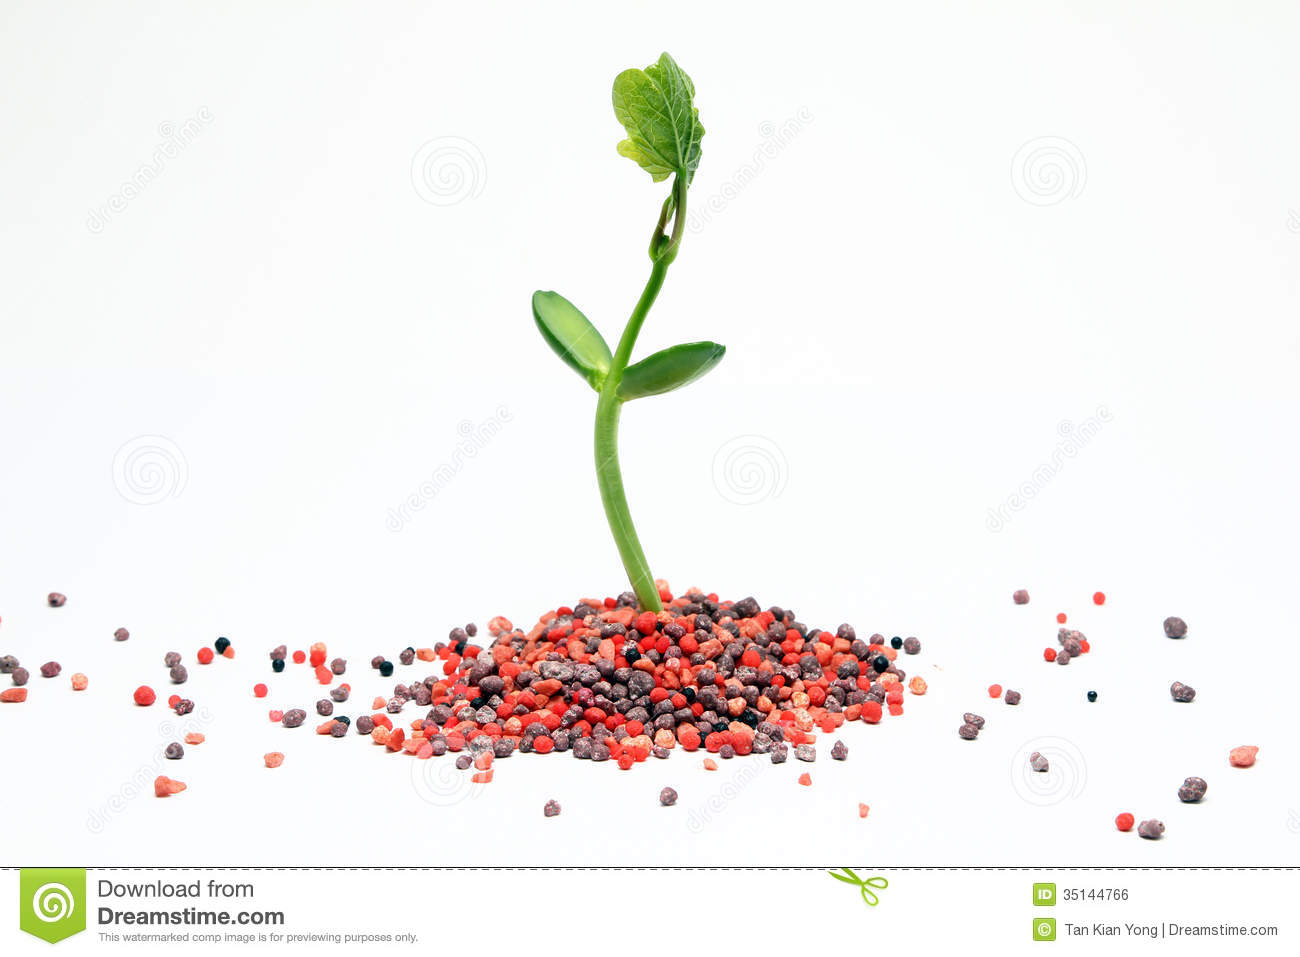 Chemical Fertilizer Agriculture Royalty Free Stock Image   Image